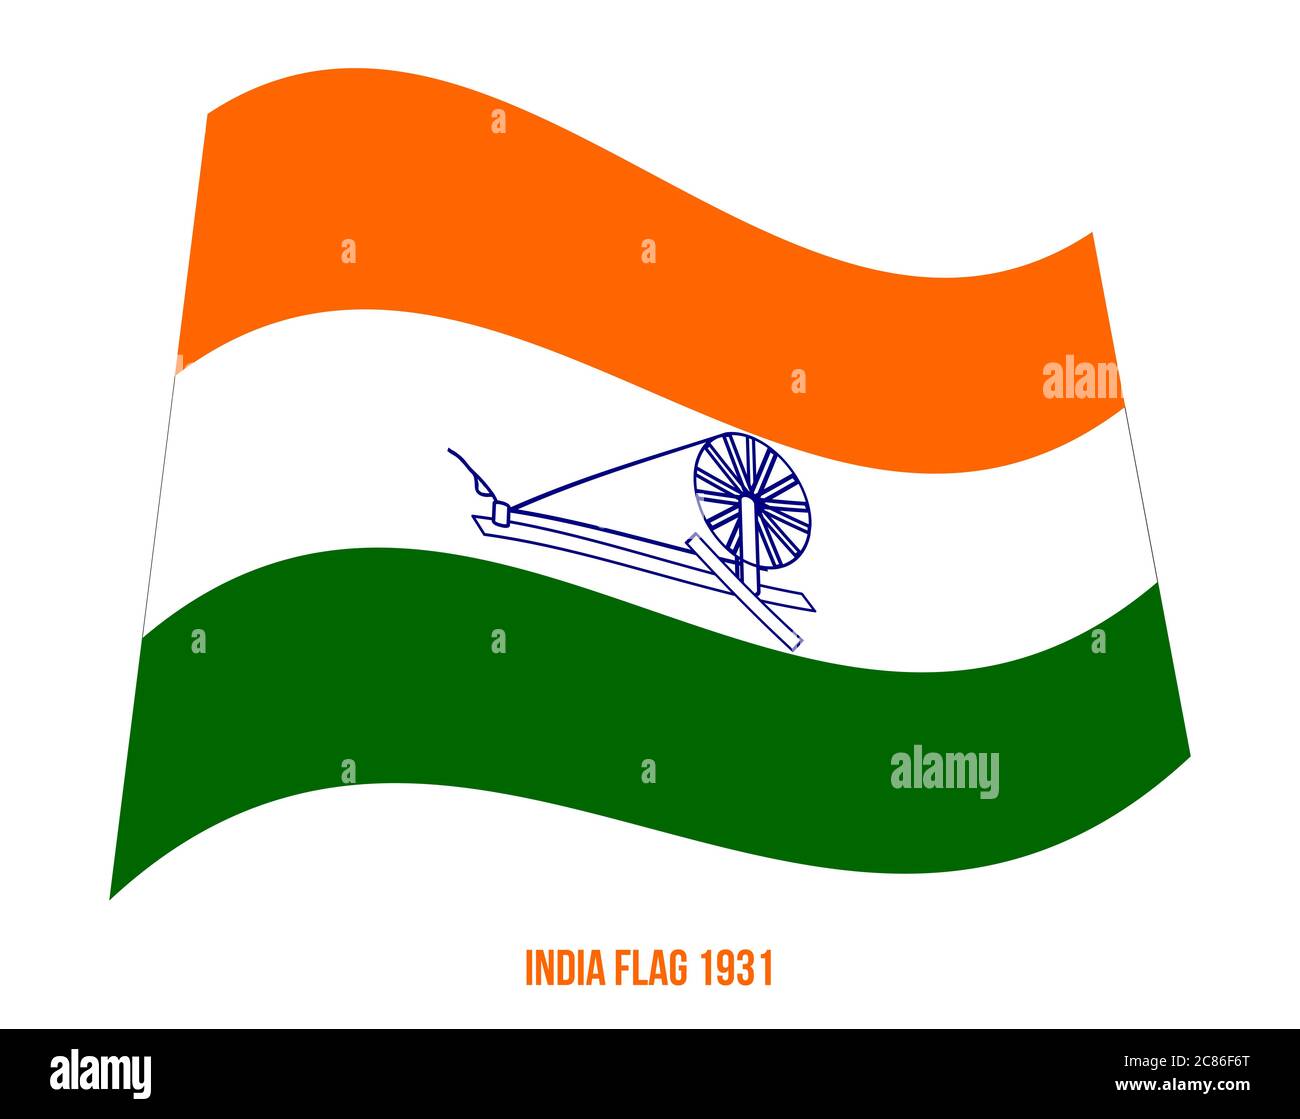 India Flag Waving 1931 Vector Illustration on White Background. Swaraj Flag Officially Adopted By The Indian National Congress in 1931. Stock Vector